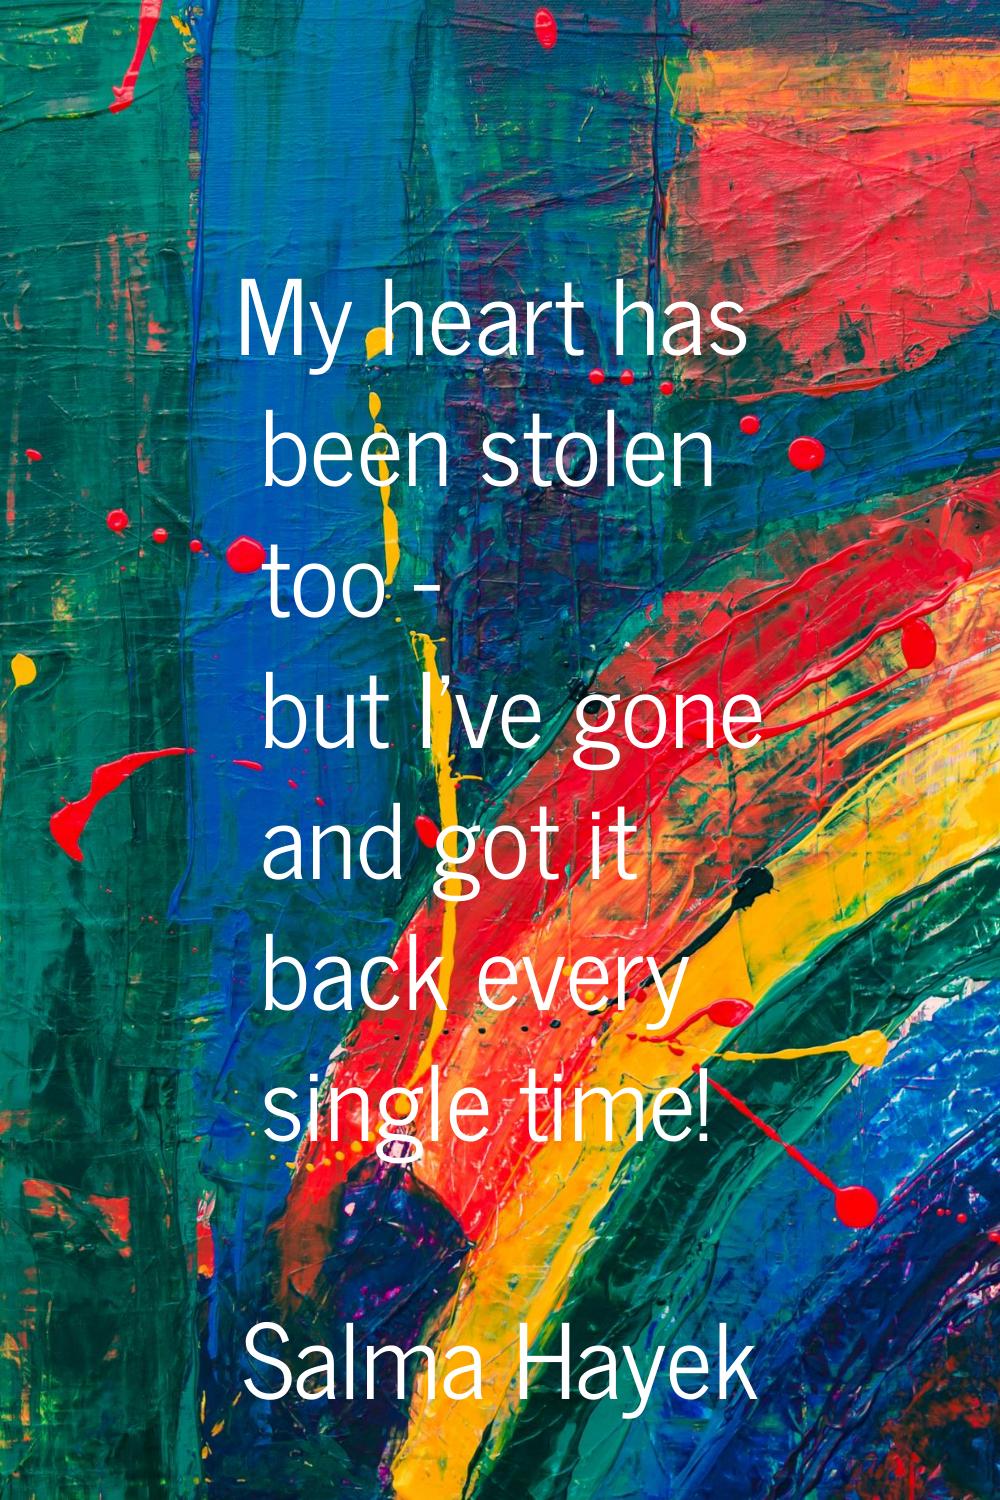 My heart has been stolen too - but I've gone and got it back every single time!